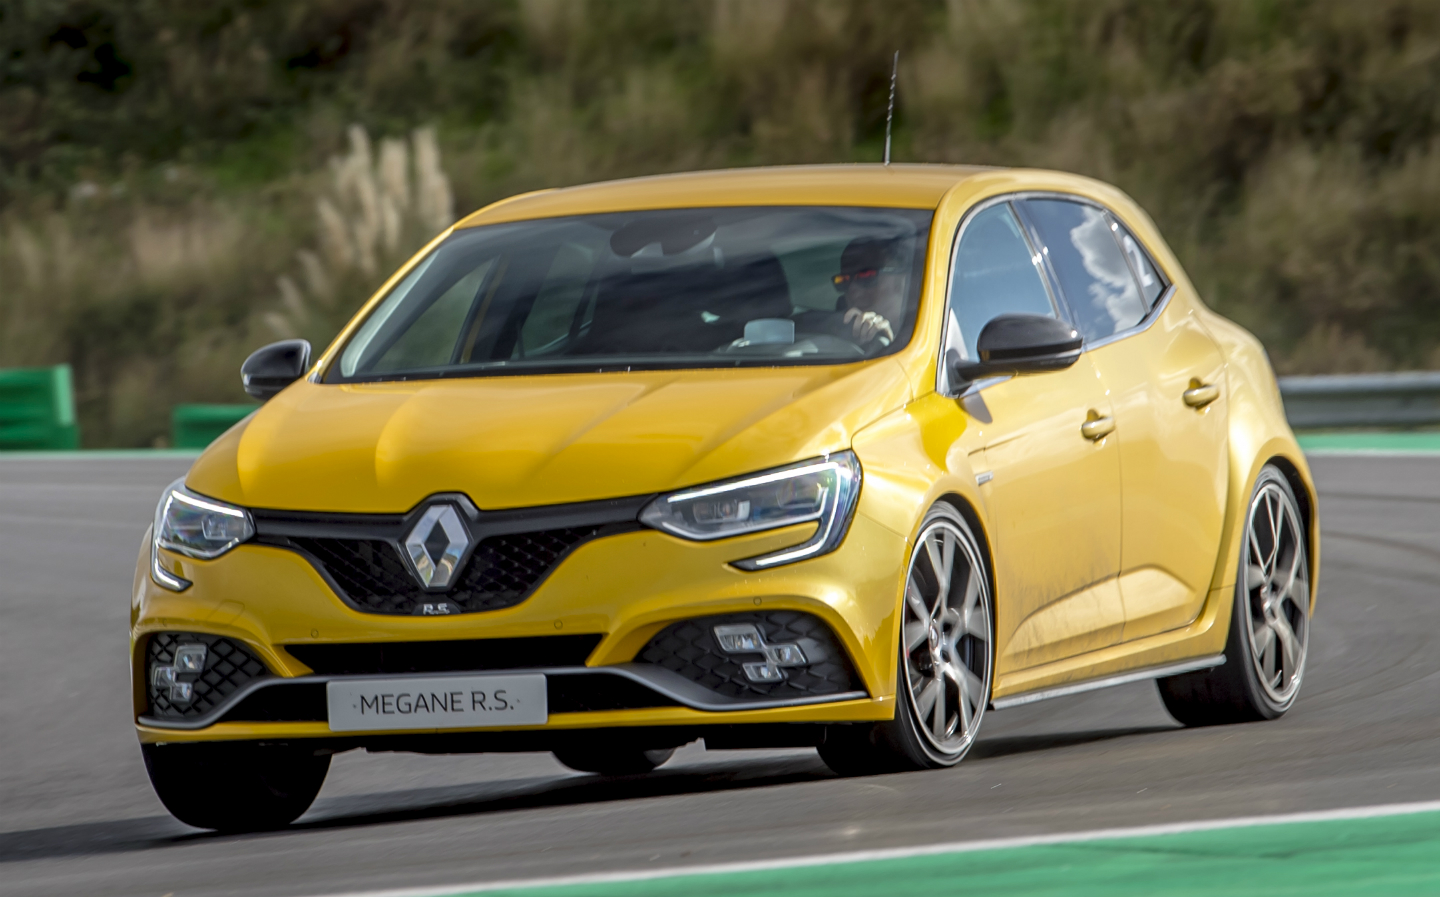 Sunday Times Motor Awards 2019 Best Hot Hatch of the Year. Renault Megane RS Trophy